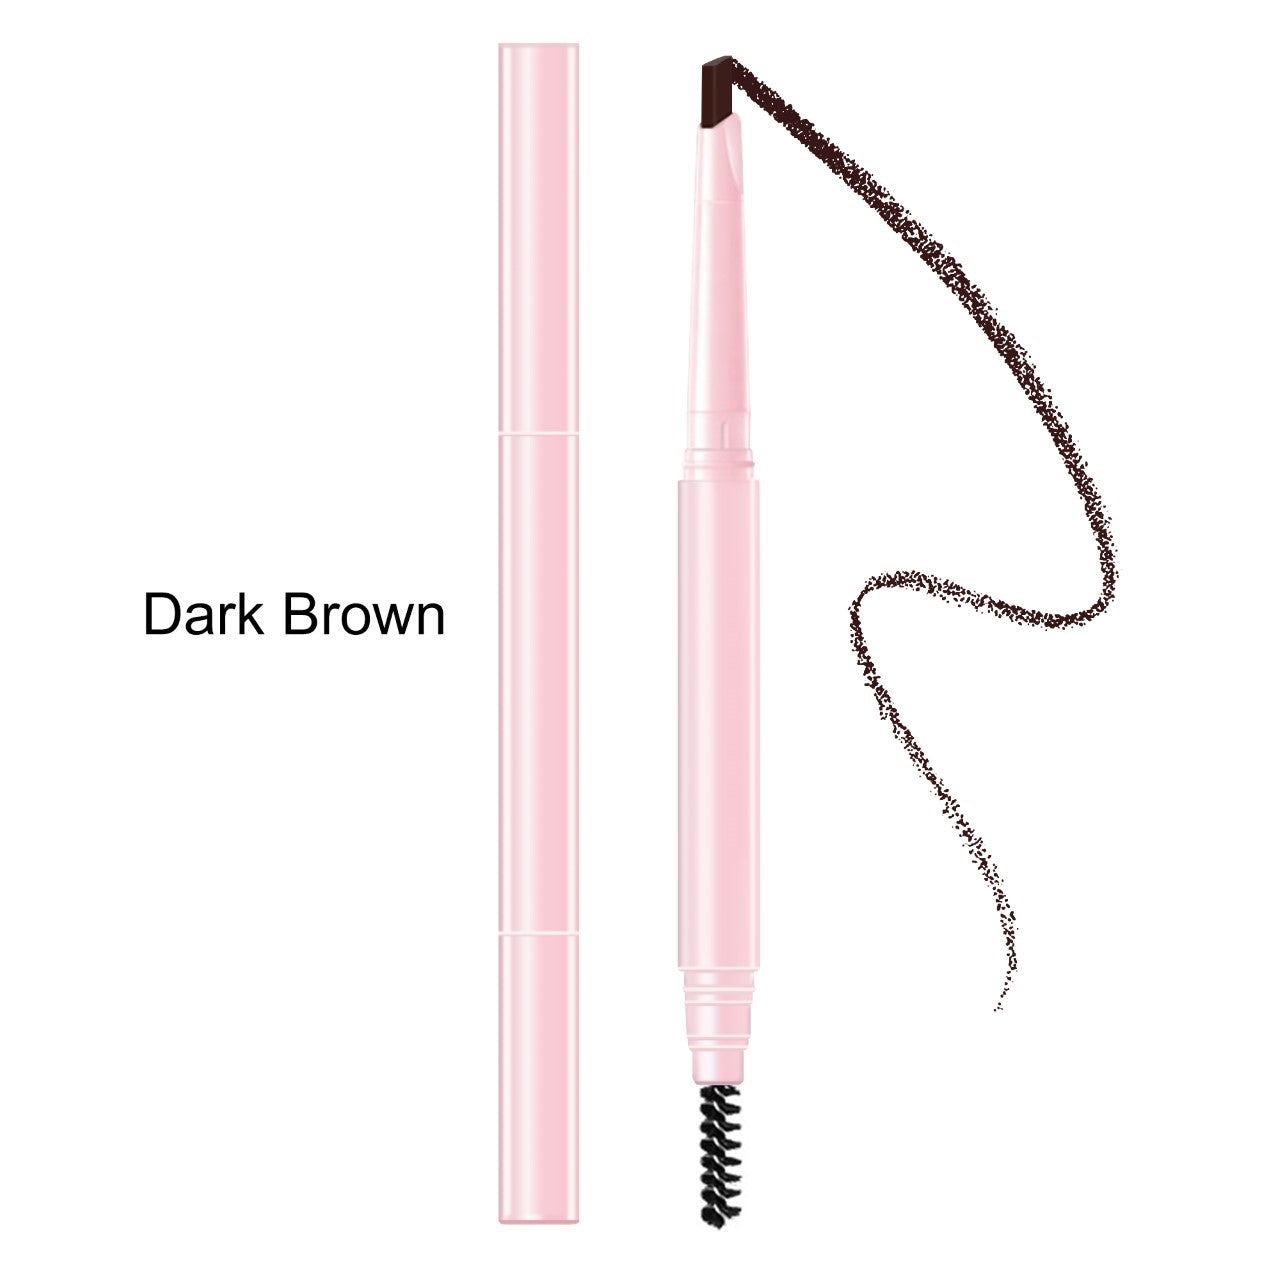 Pro Micro Brow Pencil by Beauty by Narina